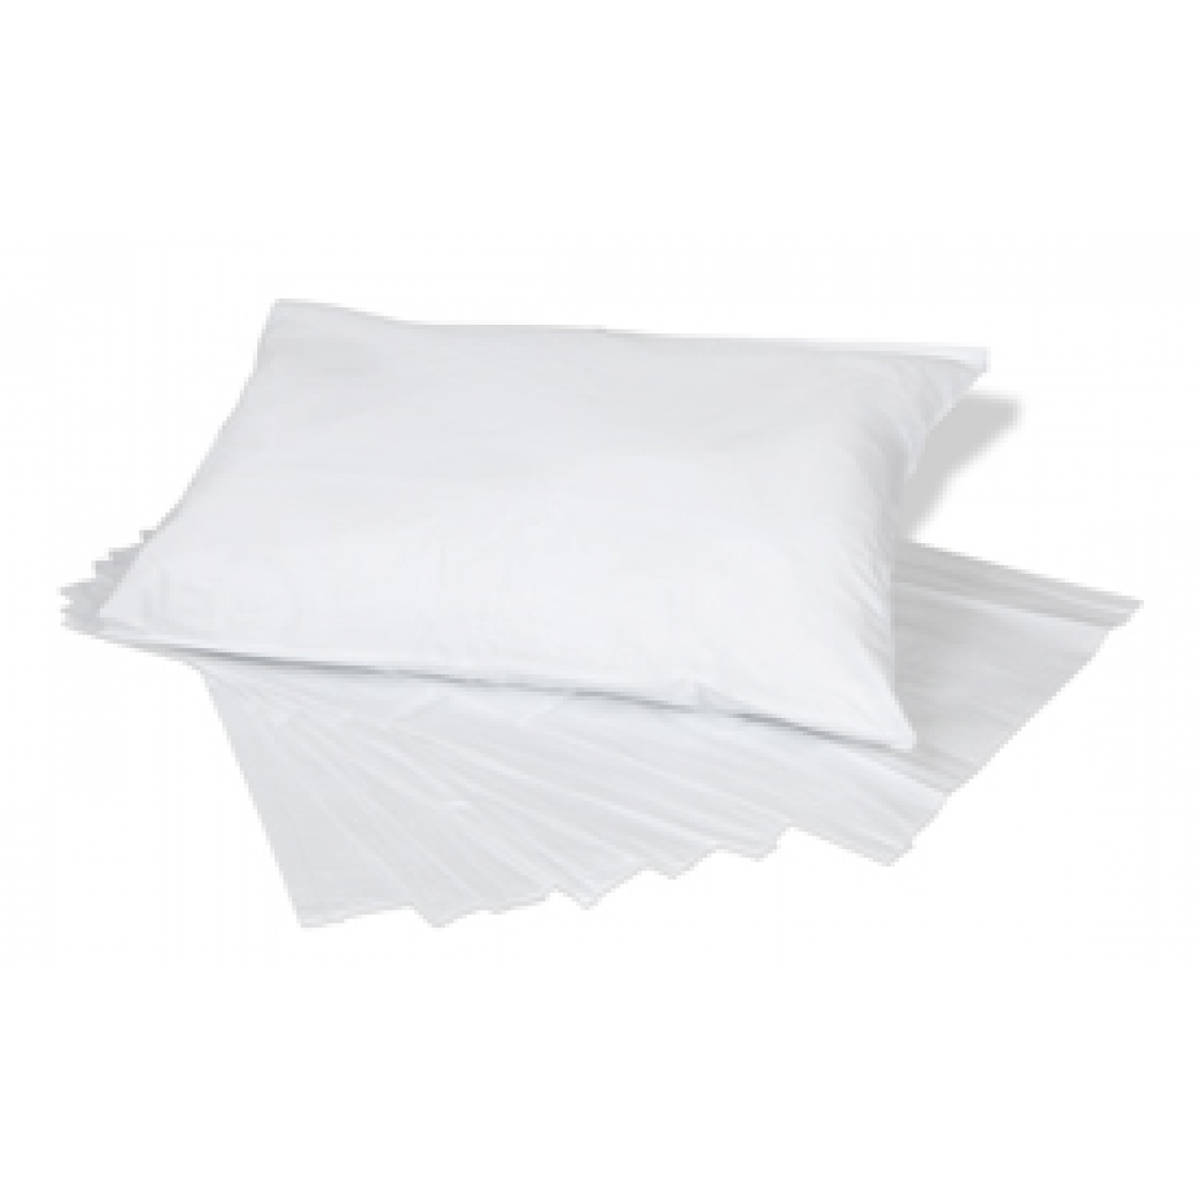 White protective pillow covers